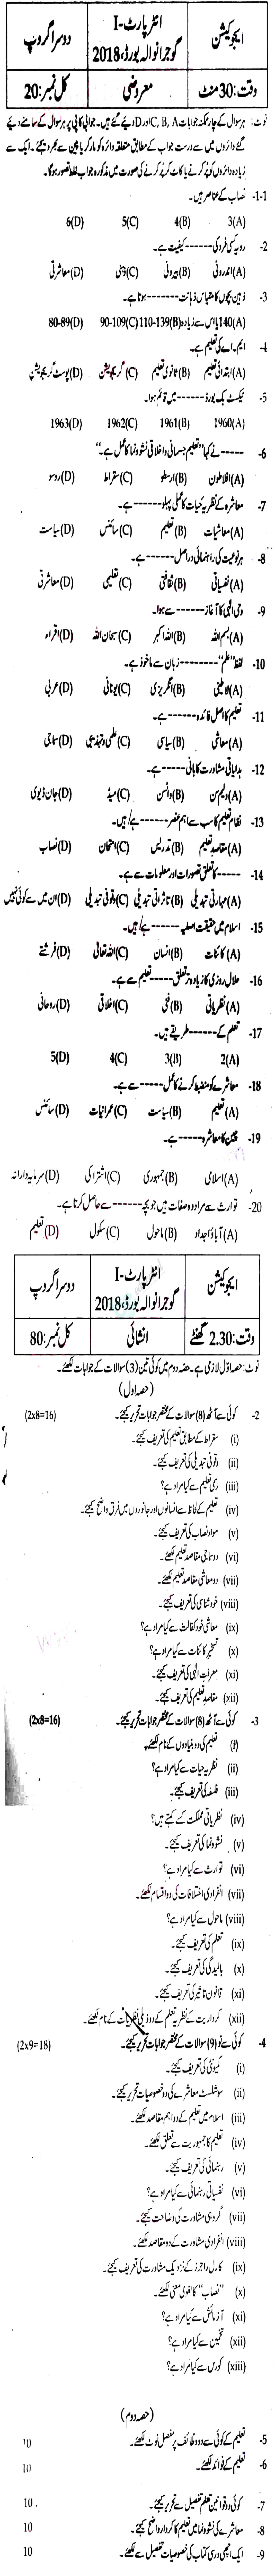 Education FA Part 1 Past Paper Group 2 BISE Gujranwala 2018